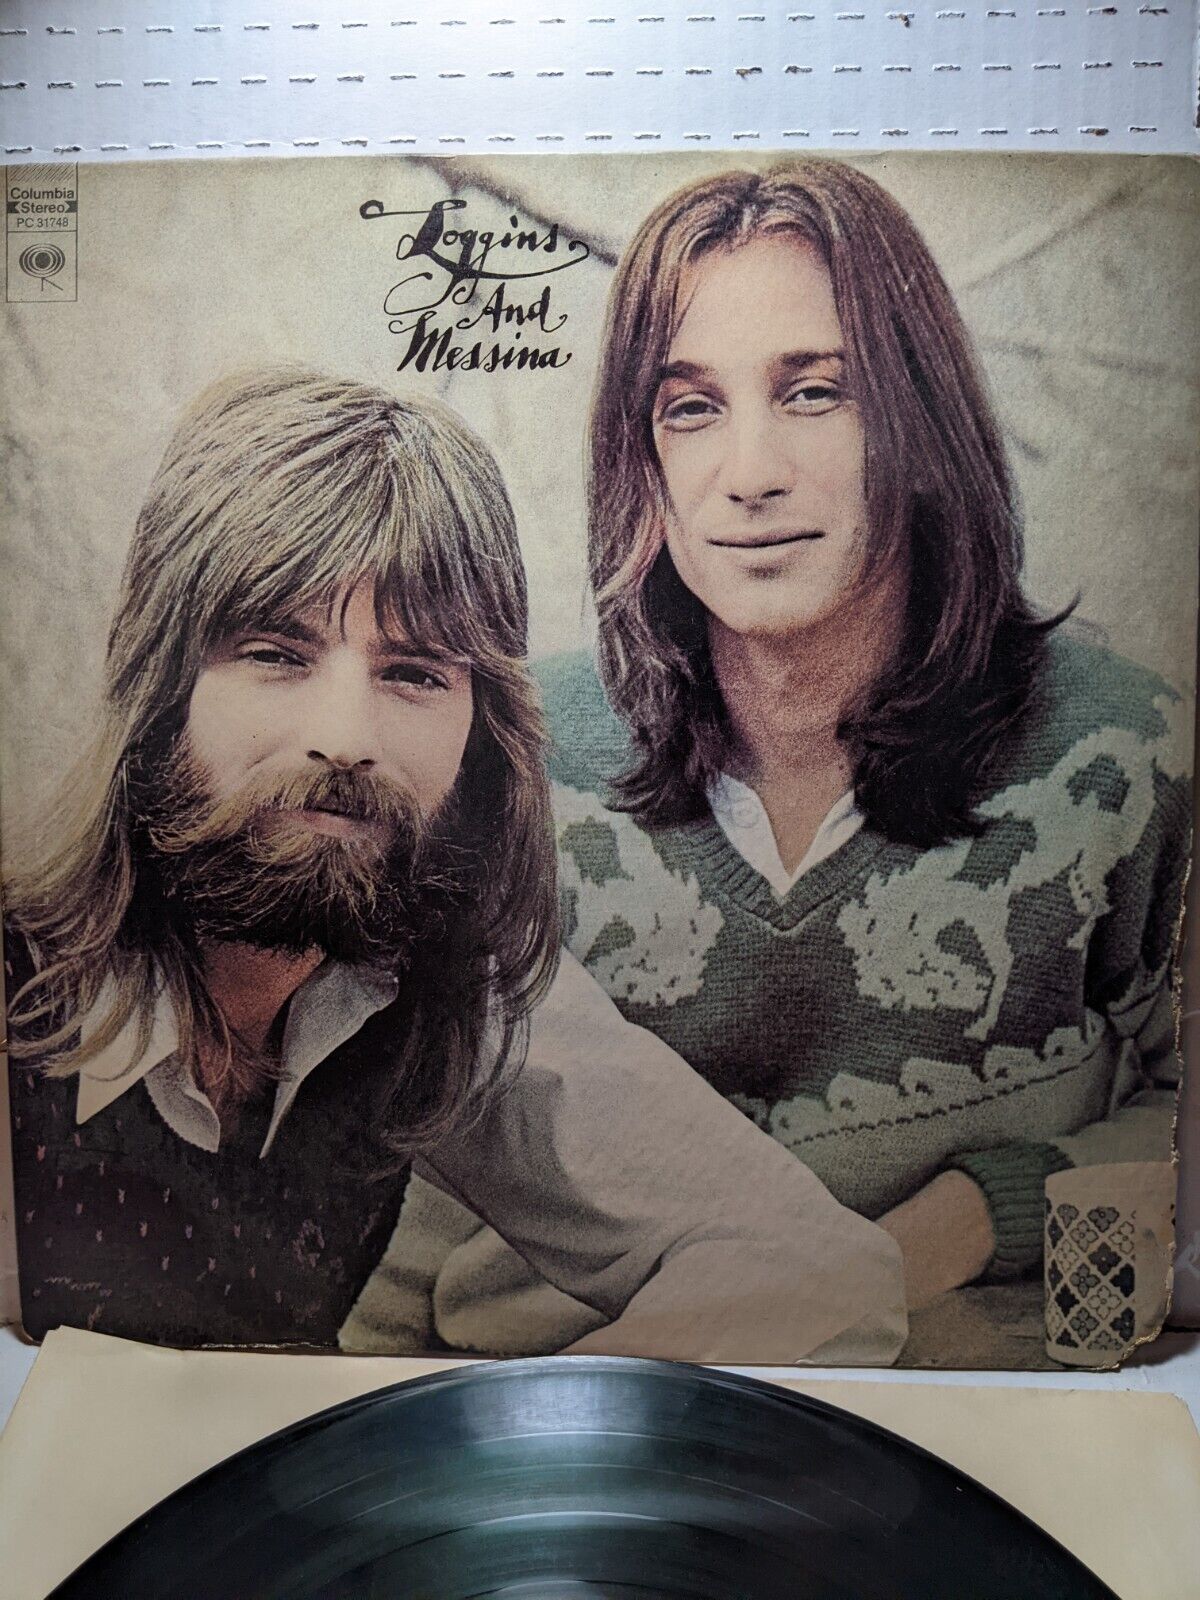 33 LP - LOGGINS and MESSINA -  (Self titled) - Columbia Records (1972)